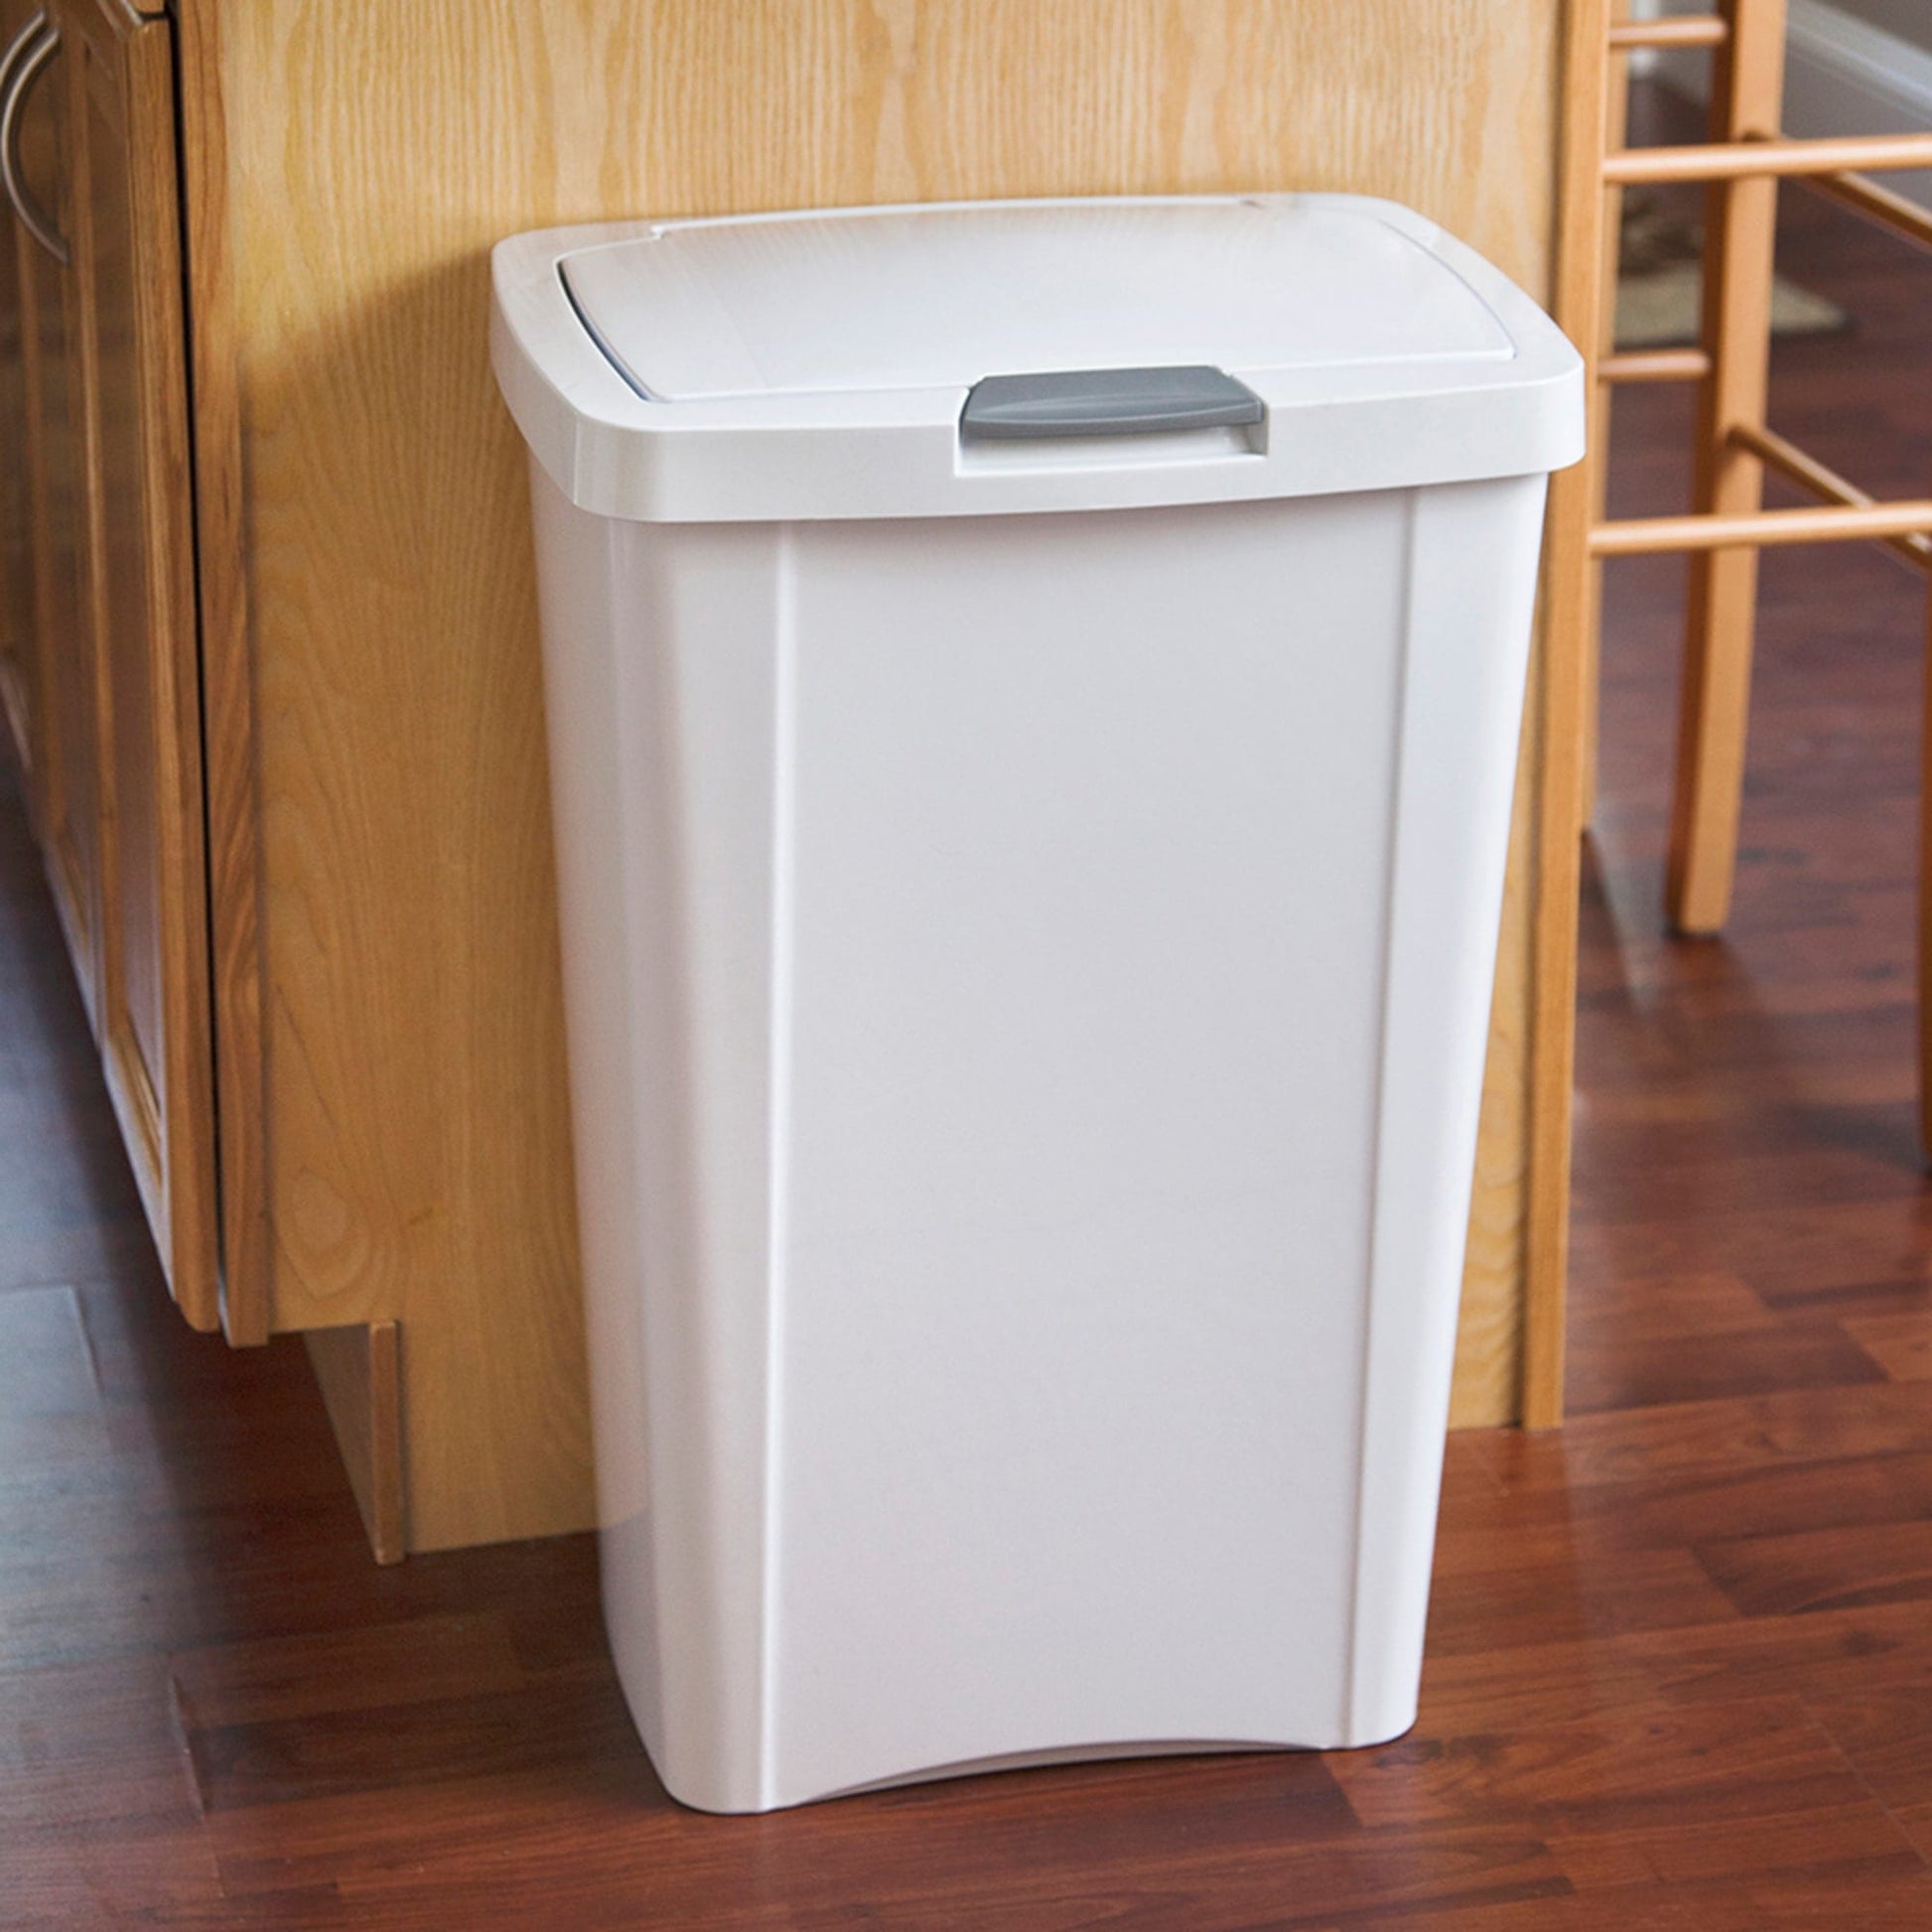 13 Gallon White Trash Can – The Clean Store